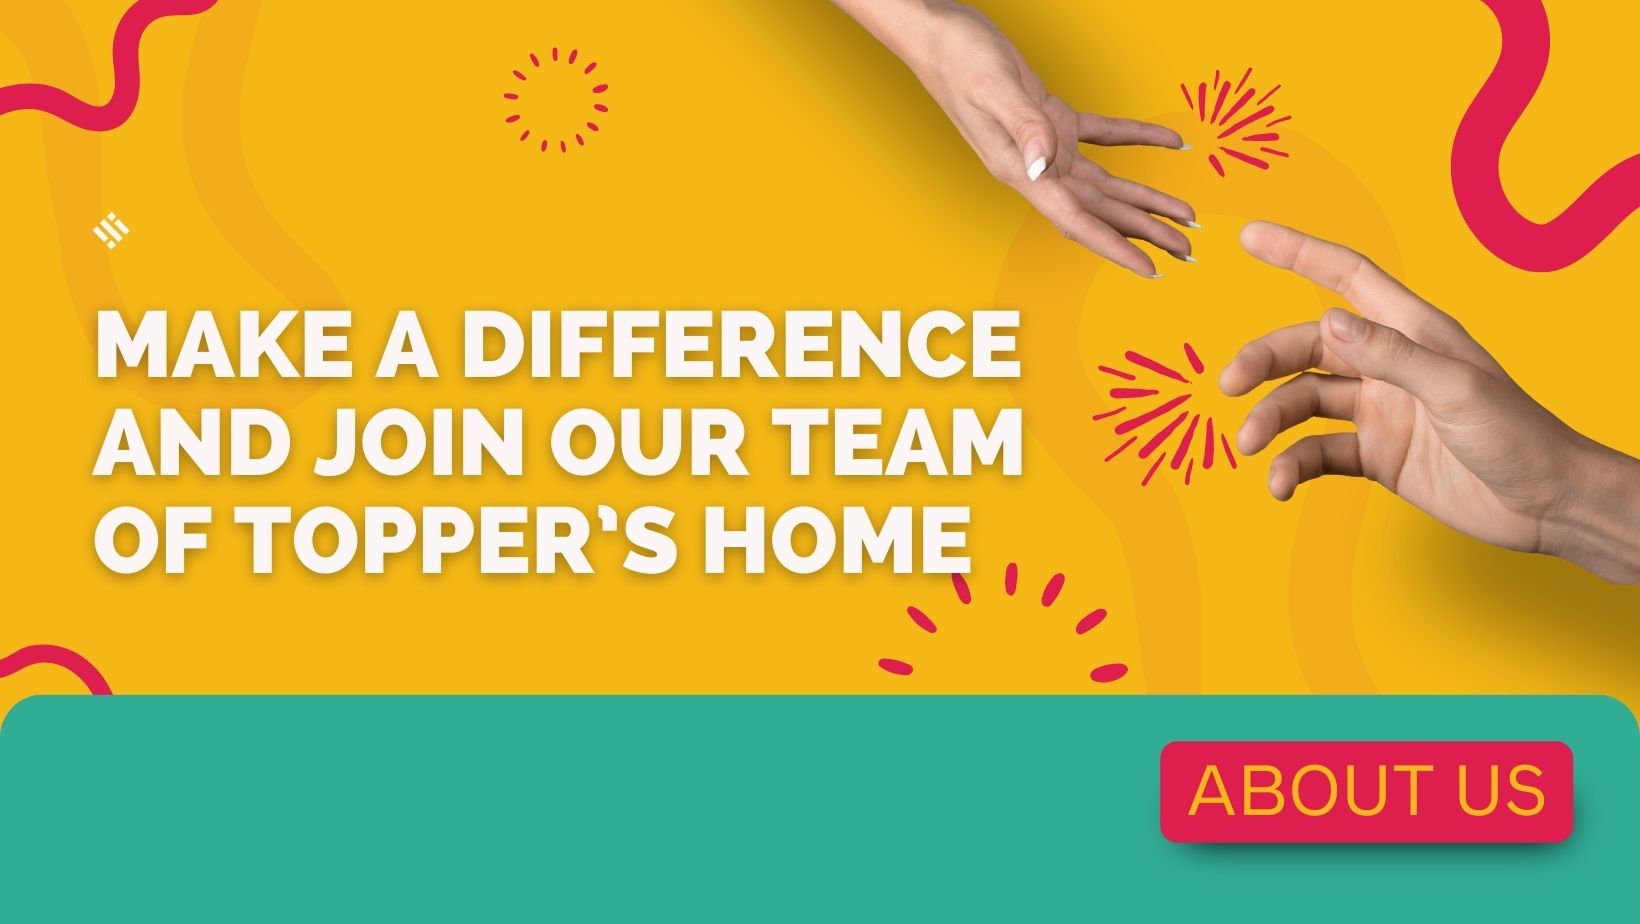 Make a Difference and Join Our Team of TOPPER’S HOME